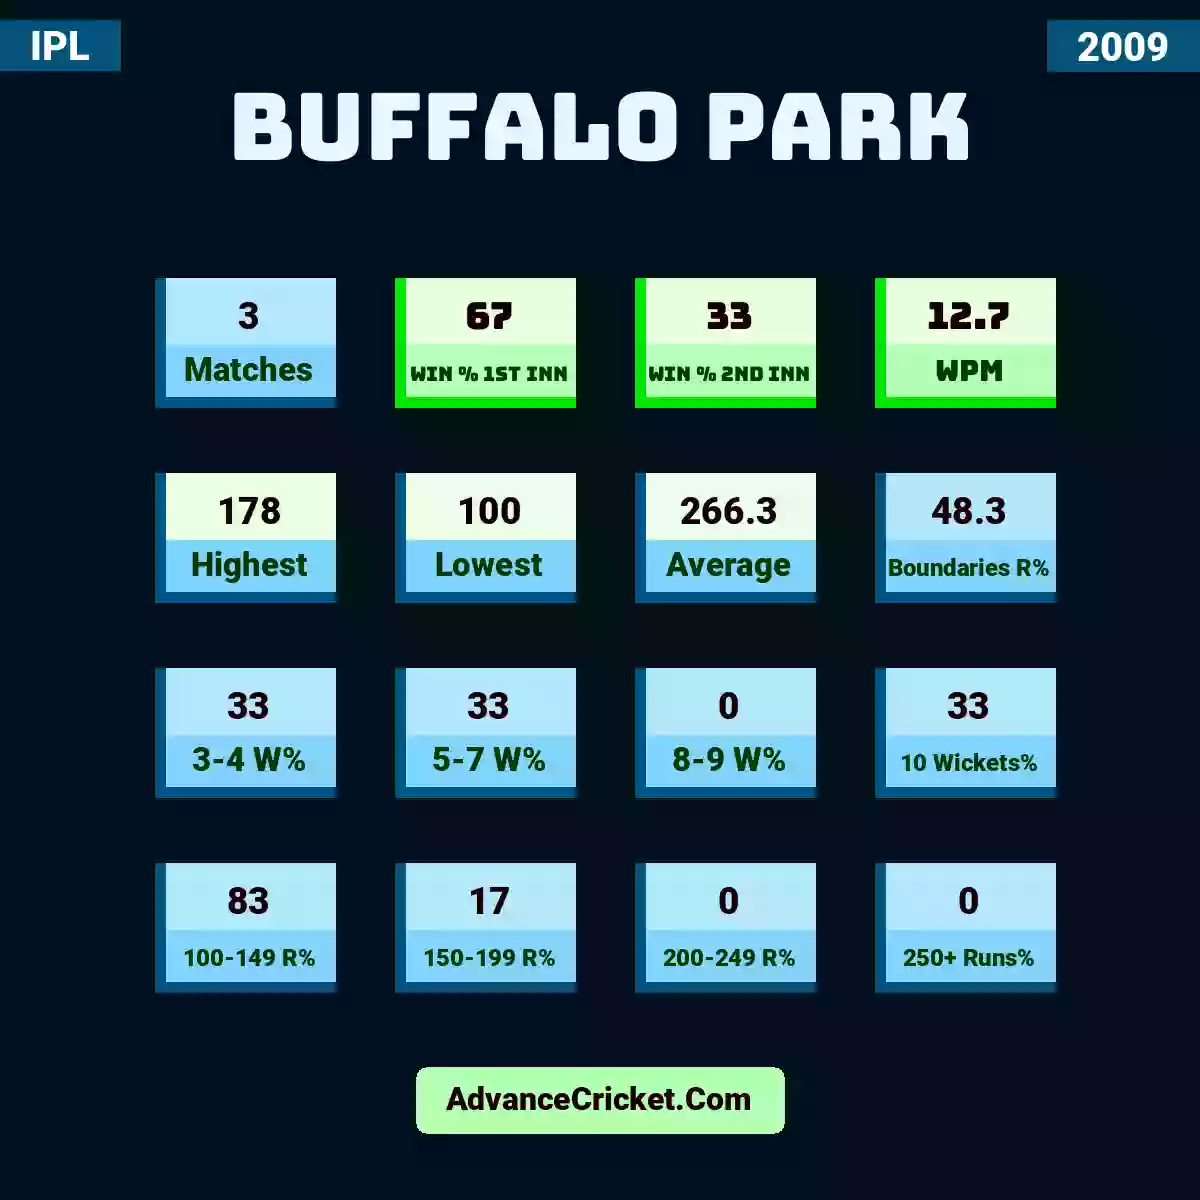 Image showing Buffalo Park with Matches: 3, Win % 1st Inn: 67, Win % 2nd Inn: 33, WPM: 12.7, Highest: 178, Lowest: 100, Average: 266.3, Boundaries R%: 48.3, 3-4 W%: 33, 5-7 W%: 33, 8-9 W%: 0, 10 Wickets%: 33, 100-149 R%: 83, 150-199 R%: 17, 200-249 R%: 0, 250+ Runs%: 0.